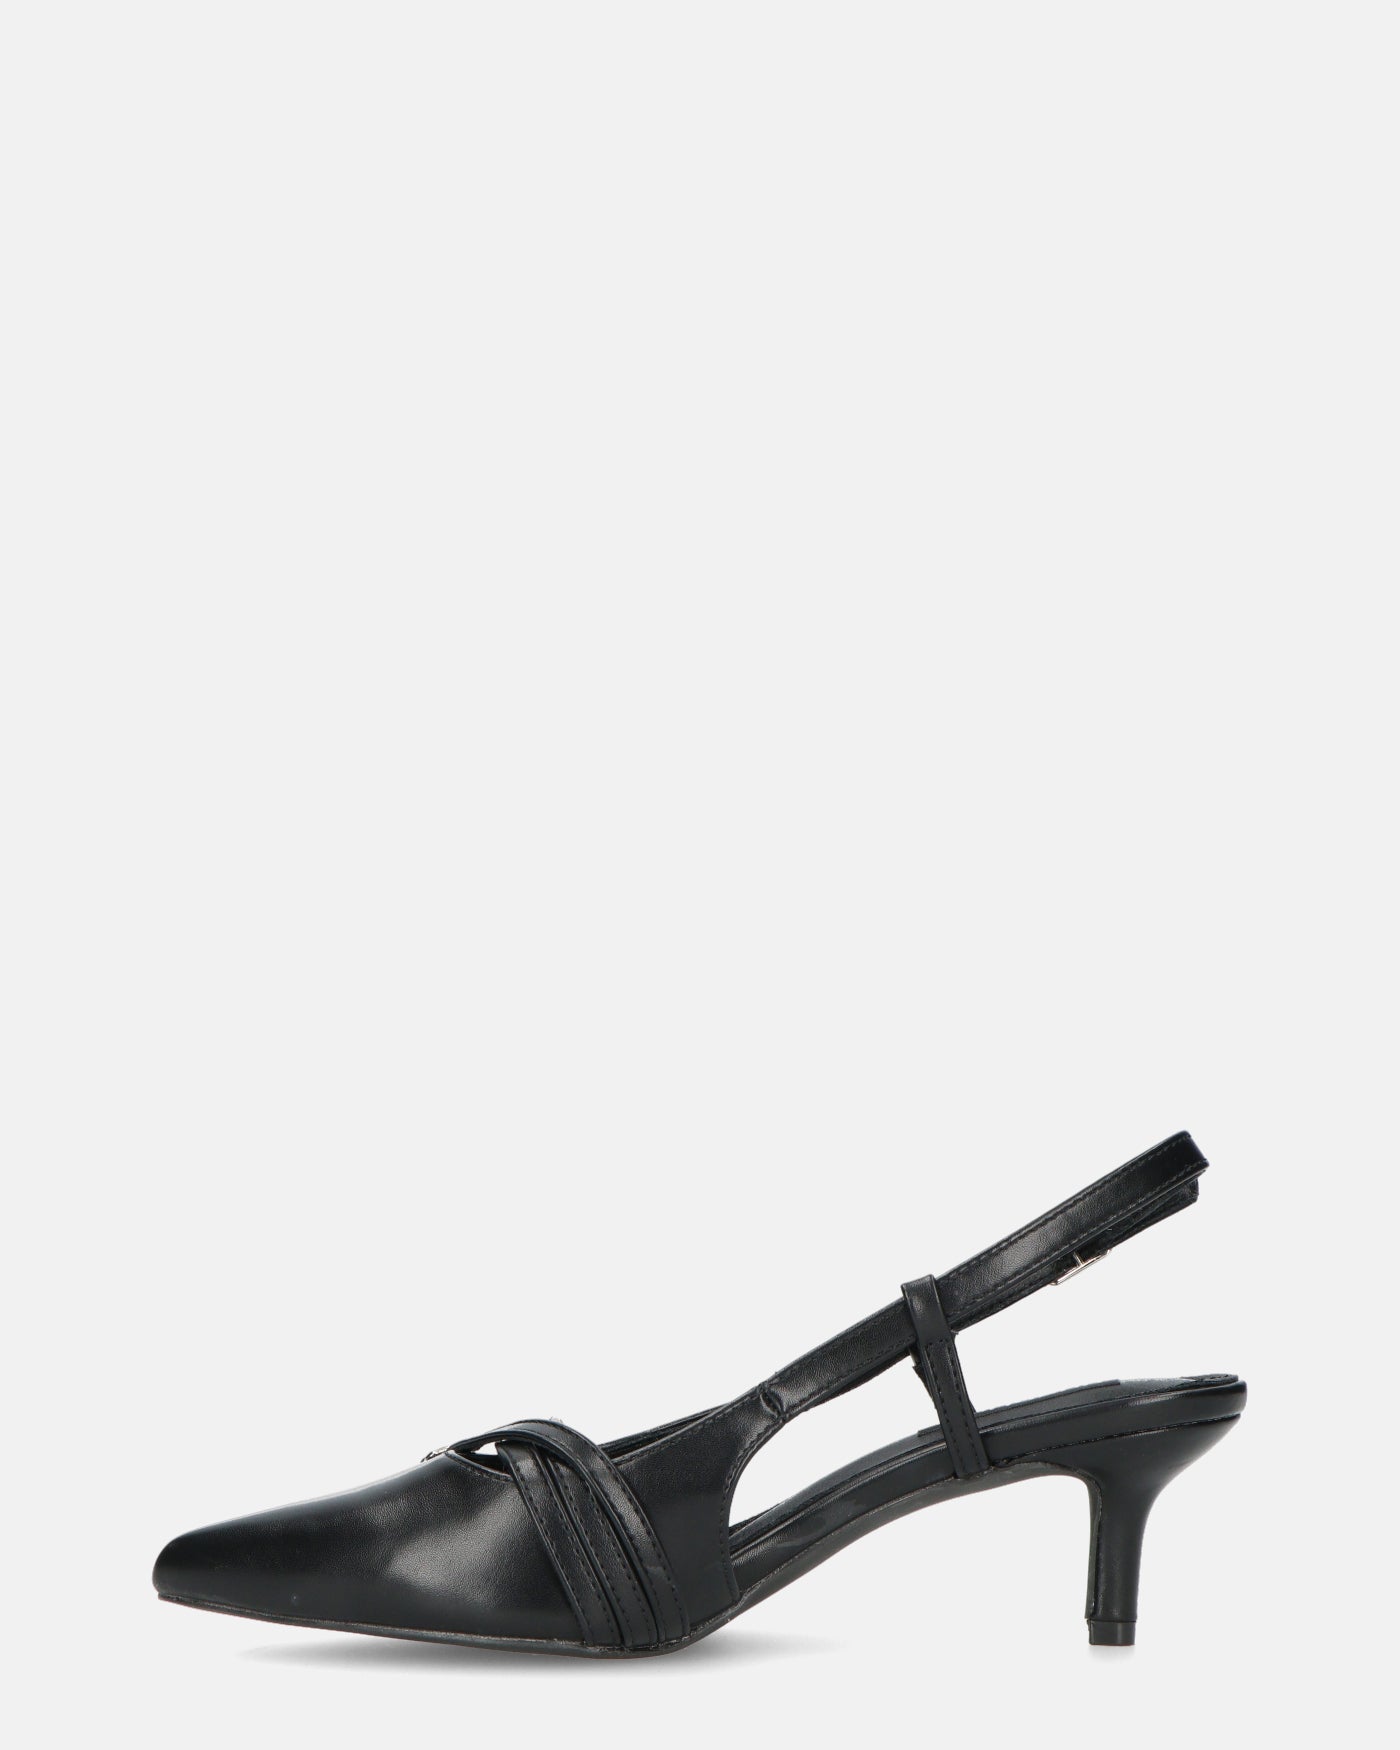 KENSLEY - heeled pumps with straps